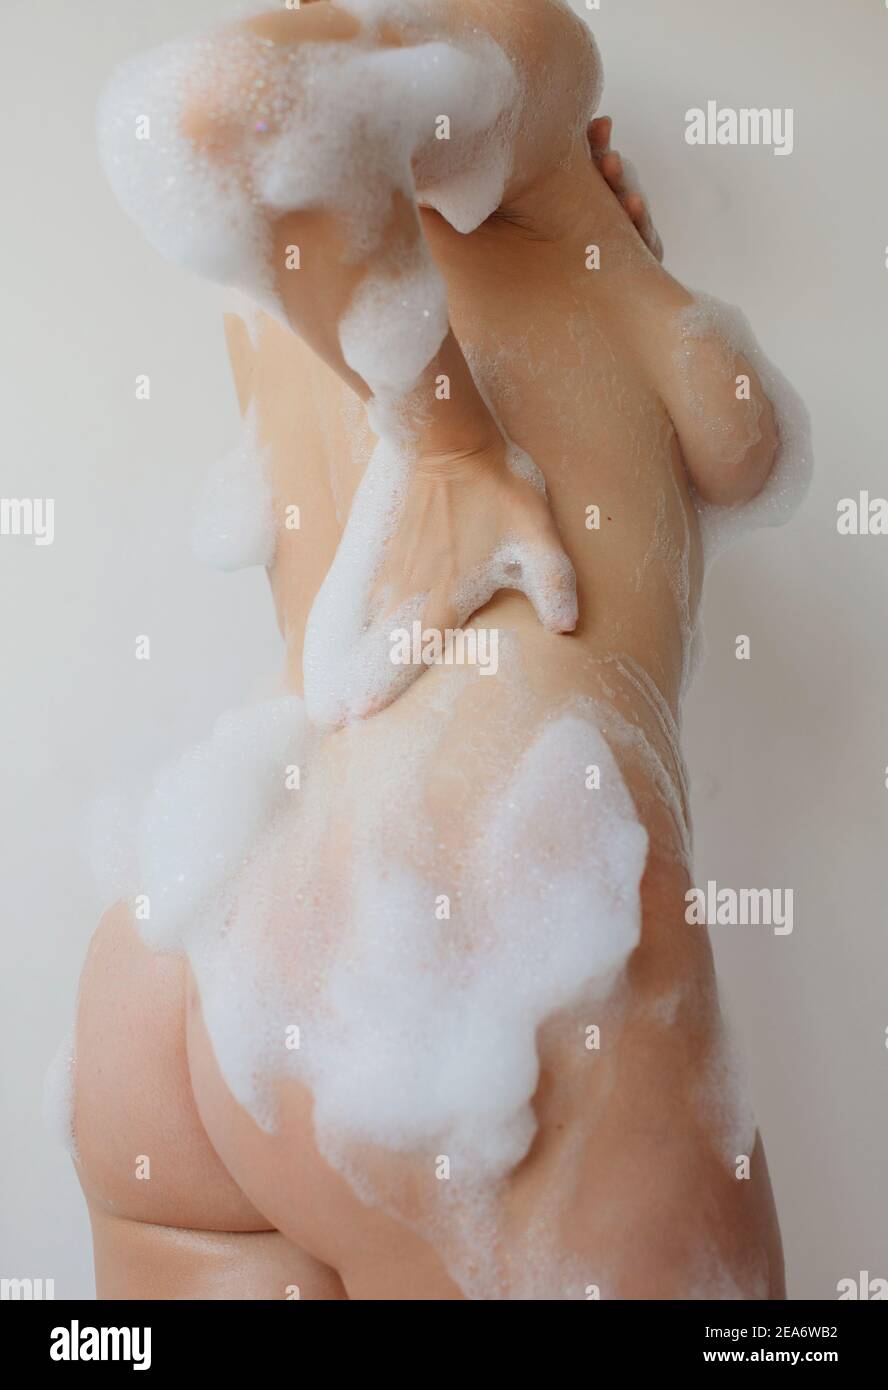 Rear view of a naked woman covered in soap suds Stock Photo